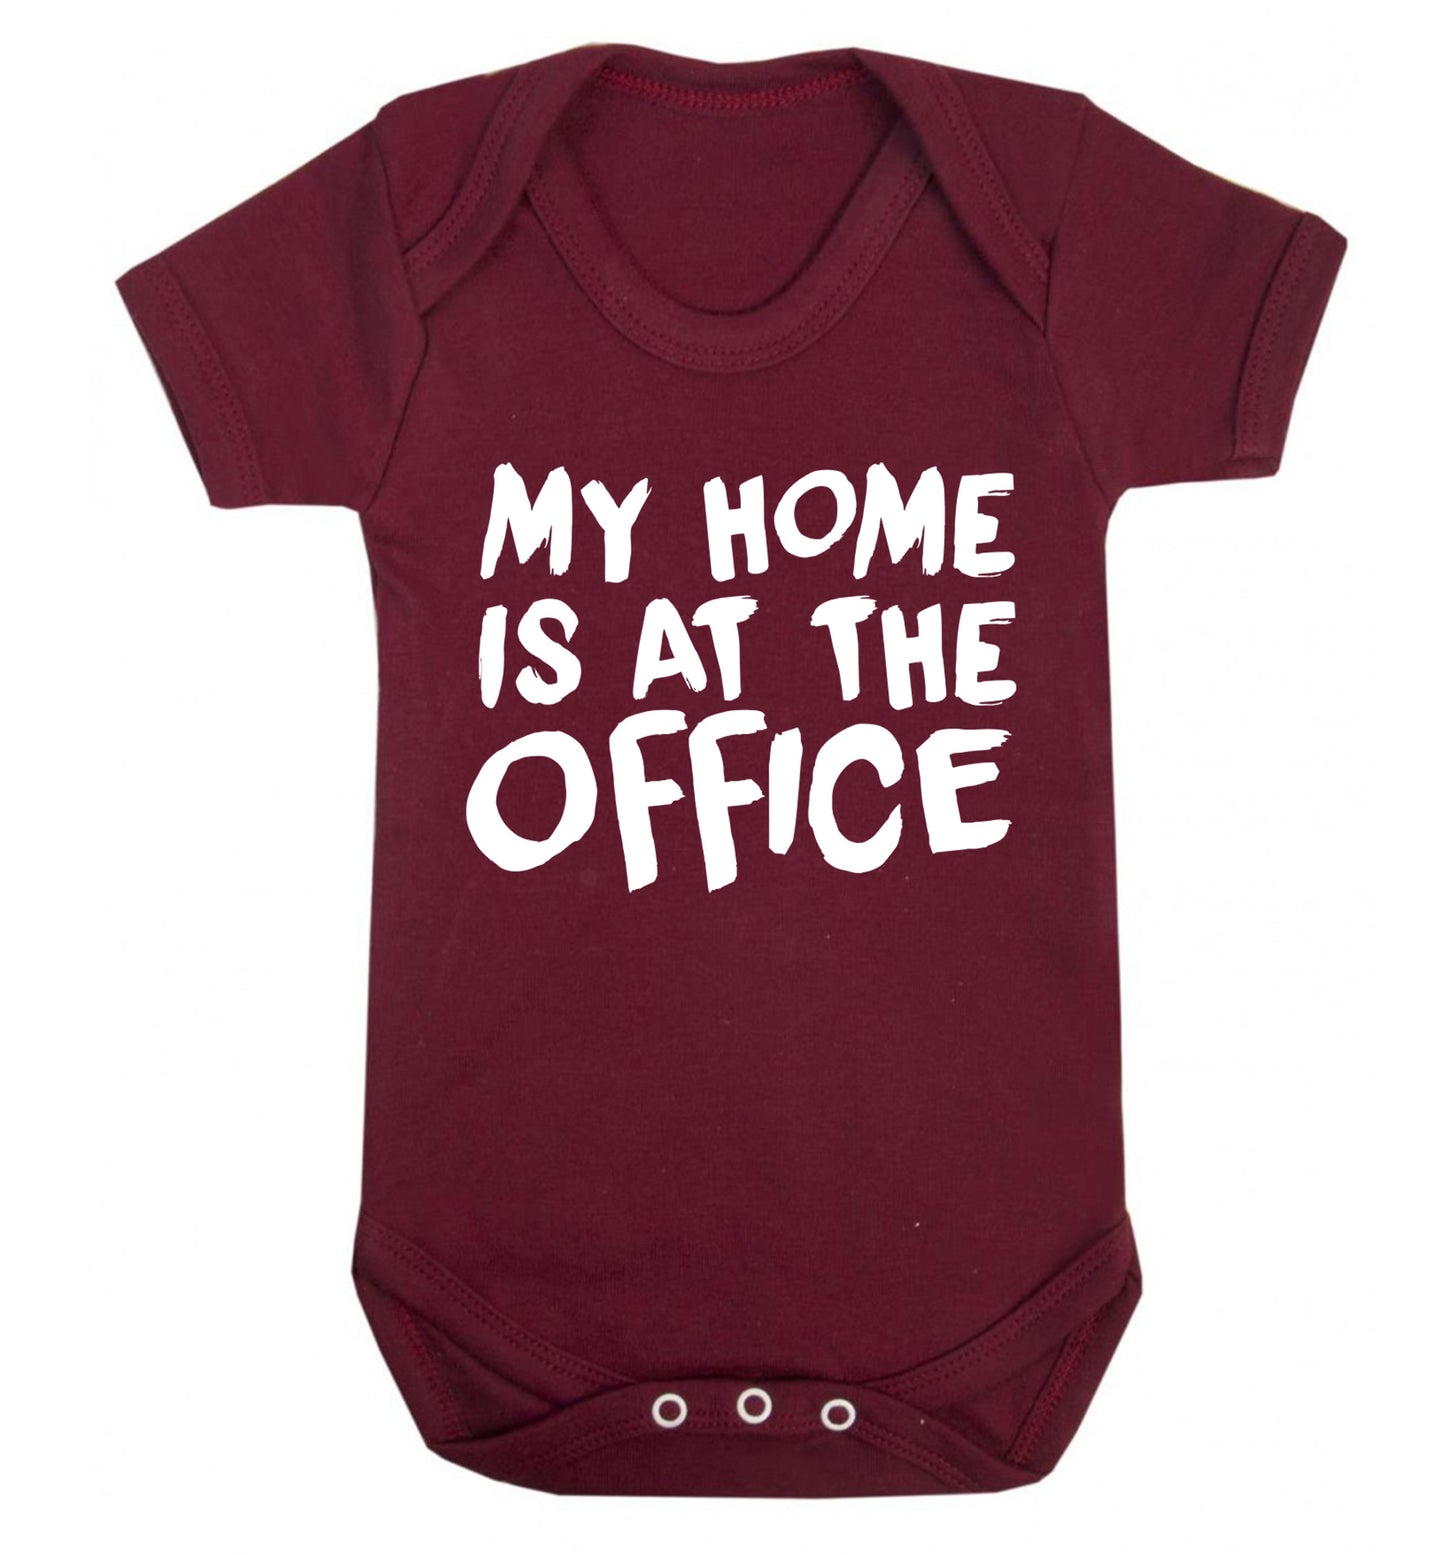 My home is at the office Baby Vest maroon 18-24 months